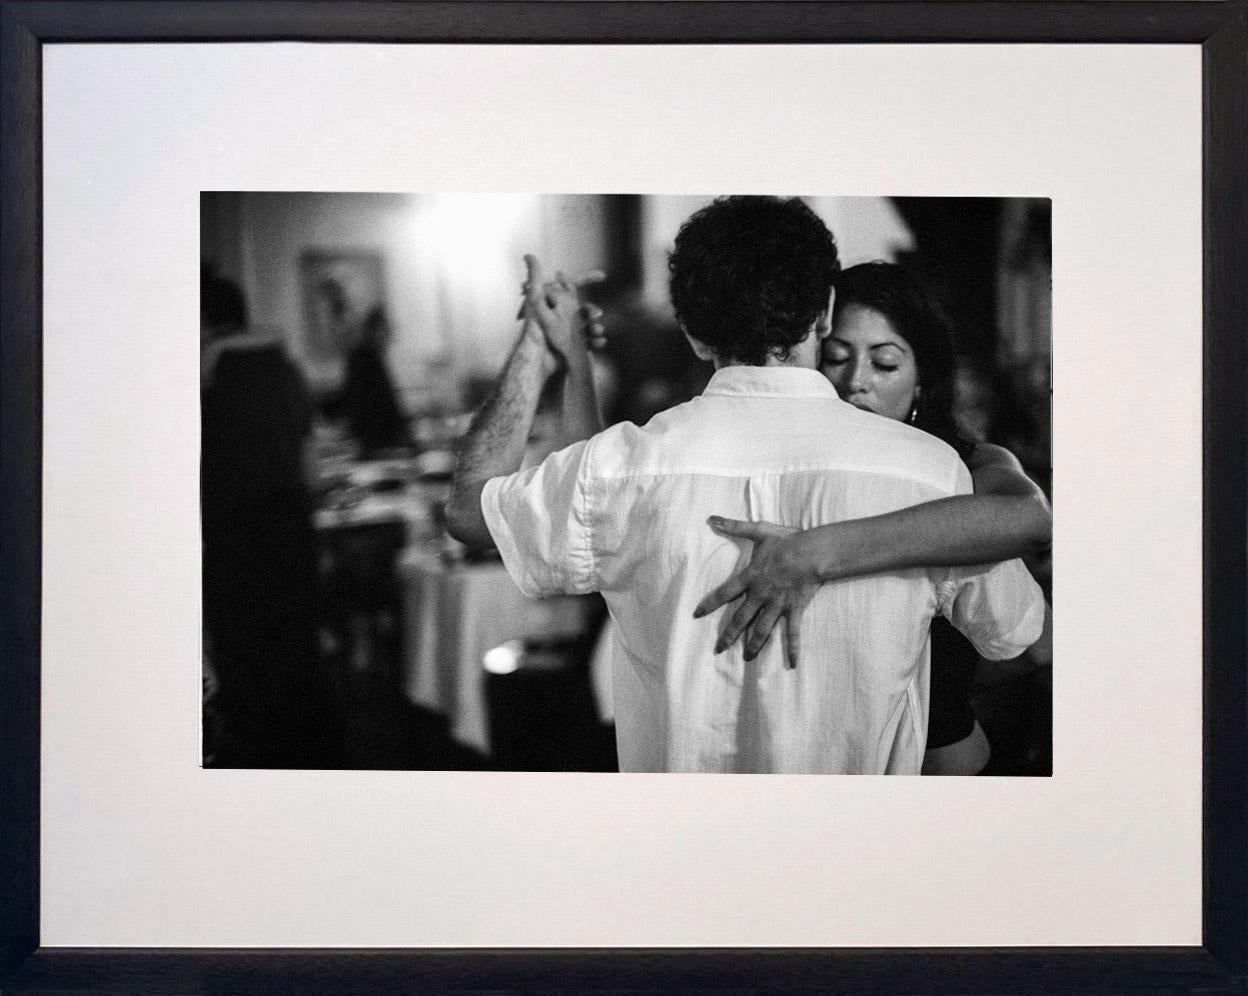 Jacquelina was photographed in the early hours in a milonga tango club in Buenos Aires.

James Sparshatt’s photographs of music and dance capture the emotion and intensity of people lost in the rhythm of the moment.

The work is available as silver